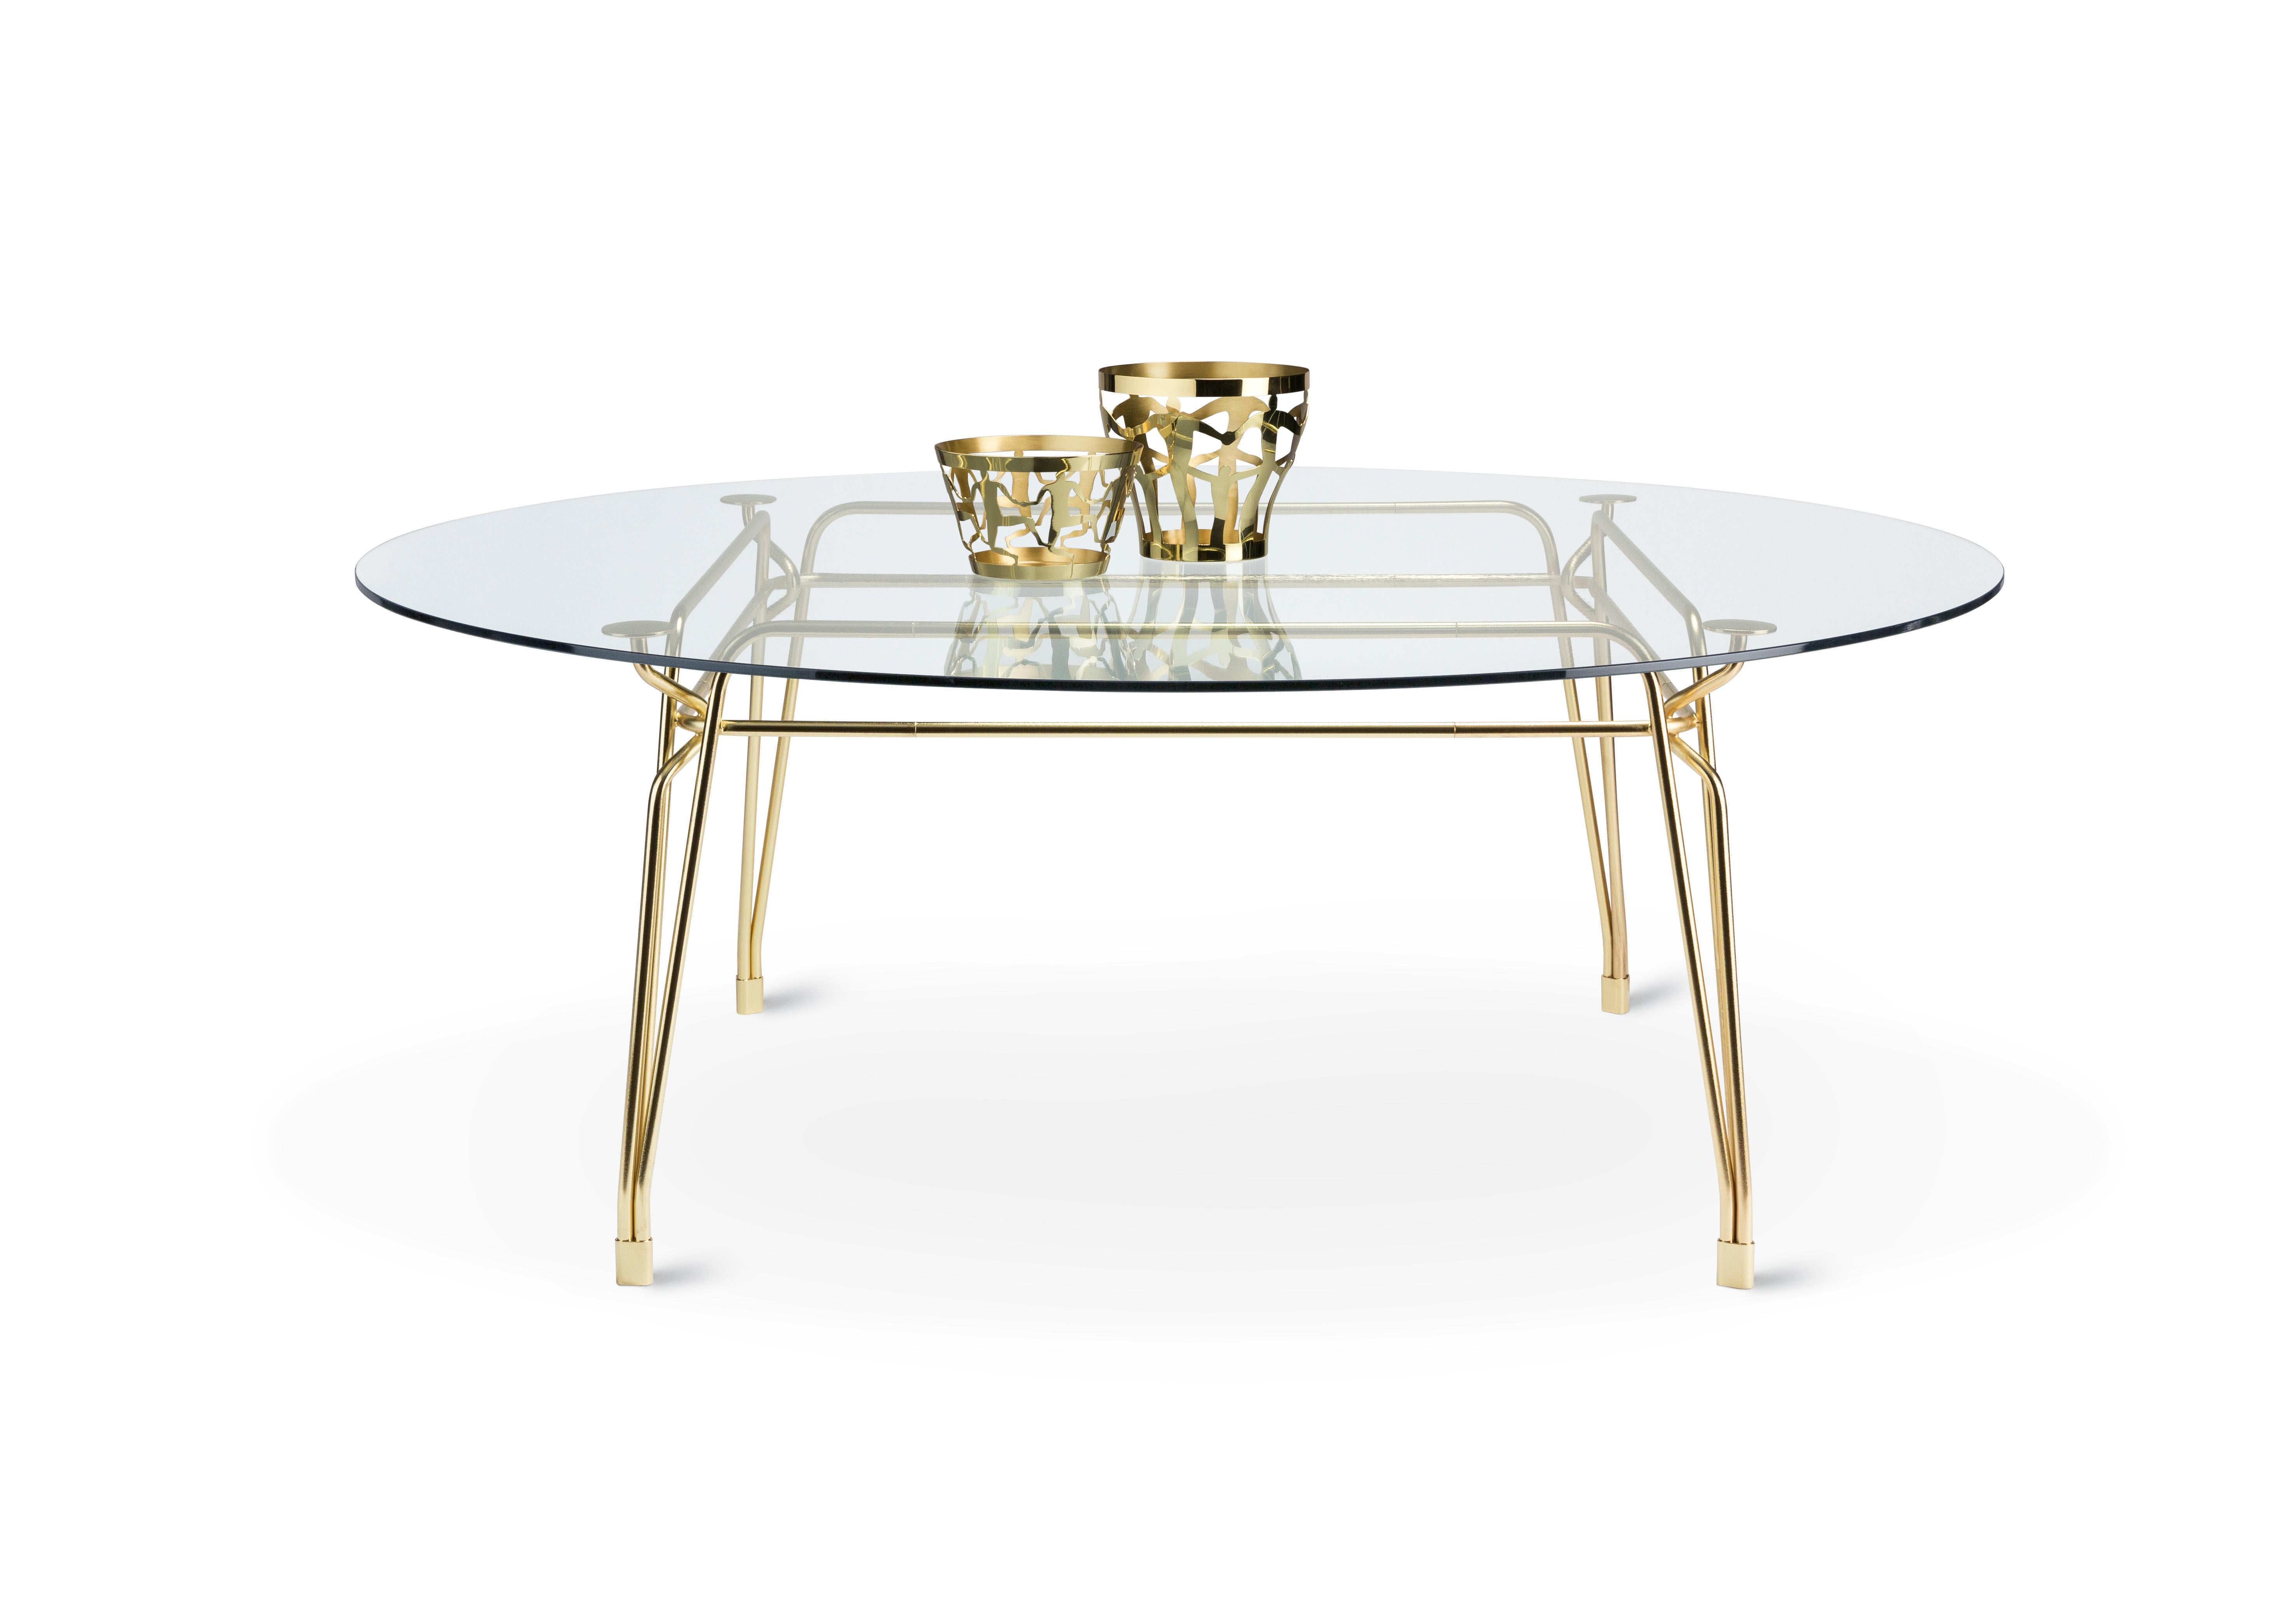 Family of tables characterized by the elegant sophisticated metal structure supporting the glass tabletop. Inspiration from turn of century outdoor furniture meets modern high-quality metal crafting. Intricate weaving of steel rods creates a